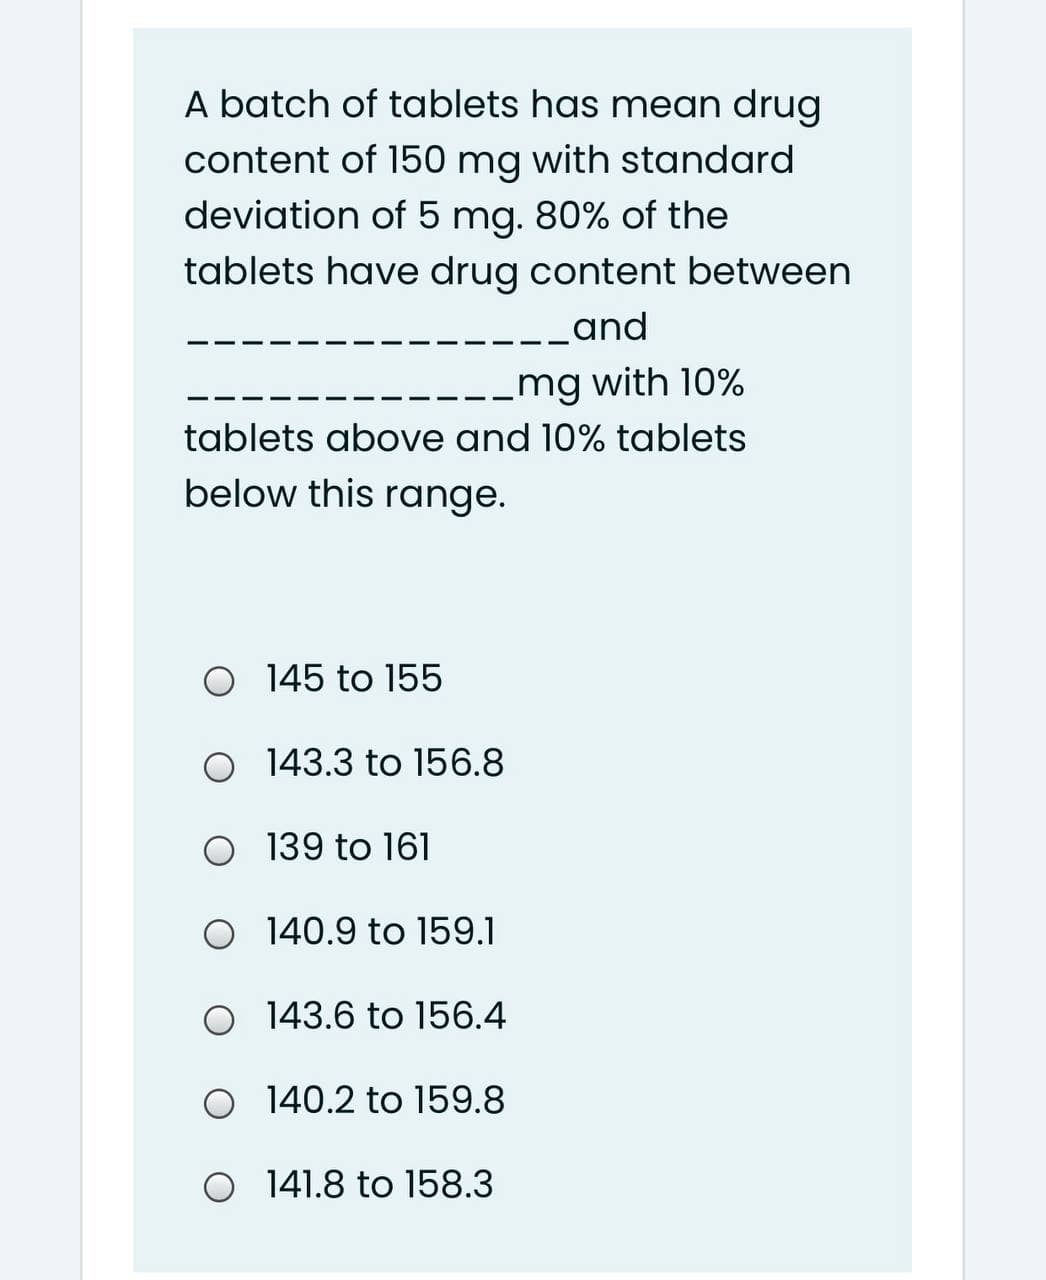 A batch of tablets has mean drug
content of 150 mg with standard
deviation of 5 mg. 80% of the
tablets have drug content between
-_and
.mg with 10%
tablets above and 10% tablets
below this range.
O 145 to 155
O 143.3 to 156.8
O 139 to 161
O 140.9 to 159.1
O 143.6 to 156.4
O 140.2 to 159.8
O 141.8 to 158.3
